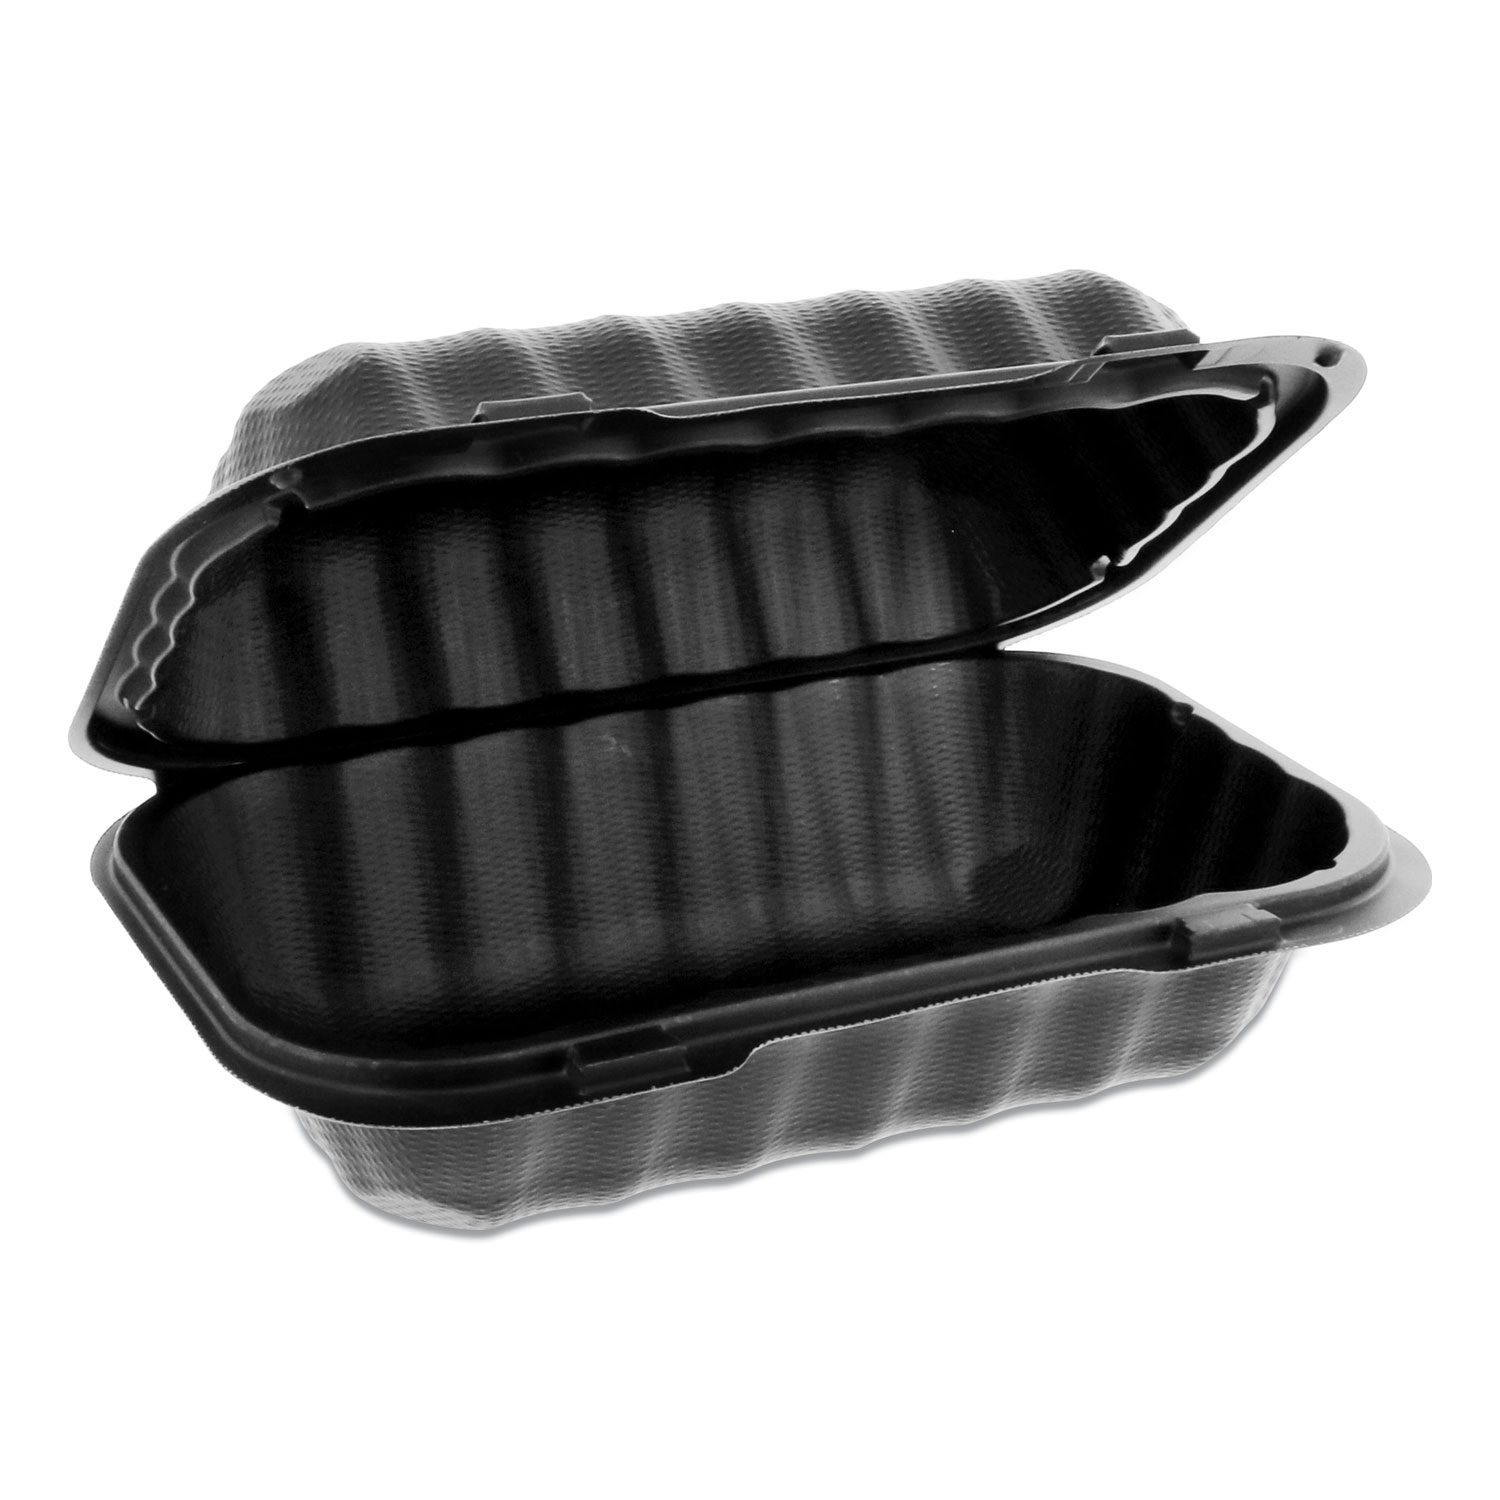  Pactiv YCNB809610000 EarthChoice SmartLock Microwavable Hinged Lid Containers, 9 x 6 x 3.25, Black, 270/Carton (PCTYCNB80961000) 